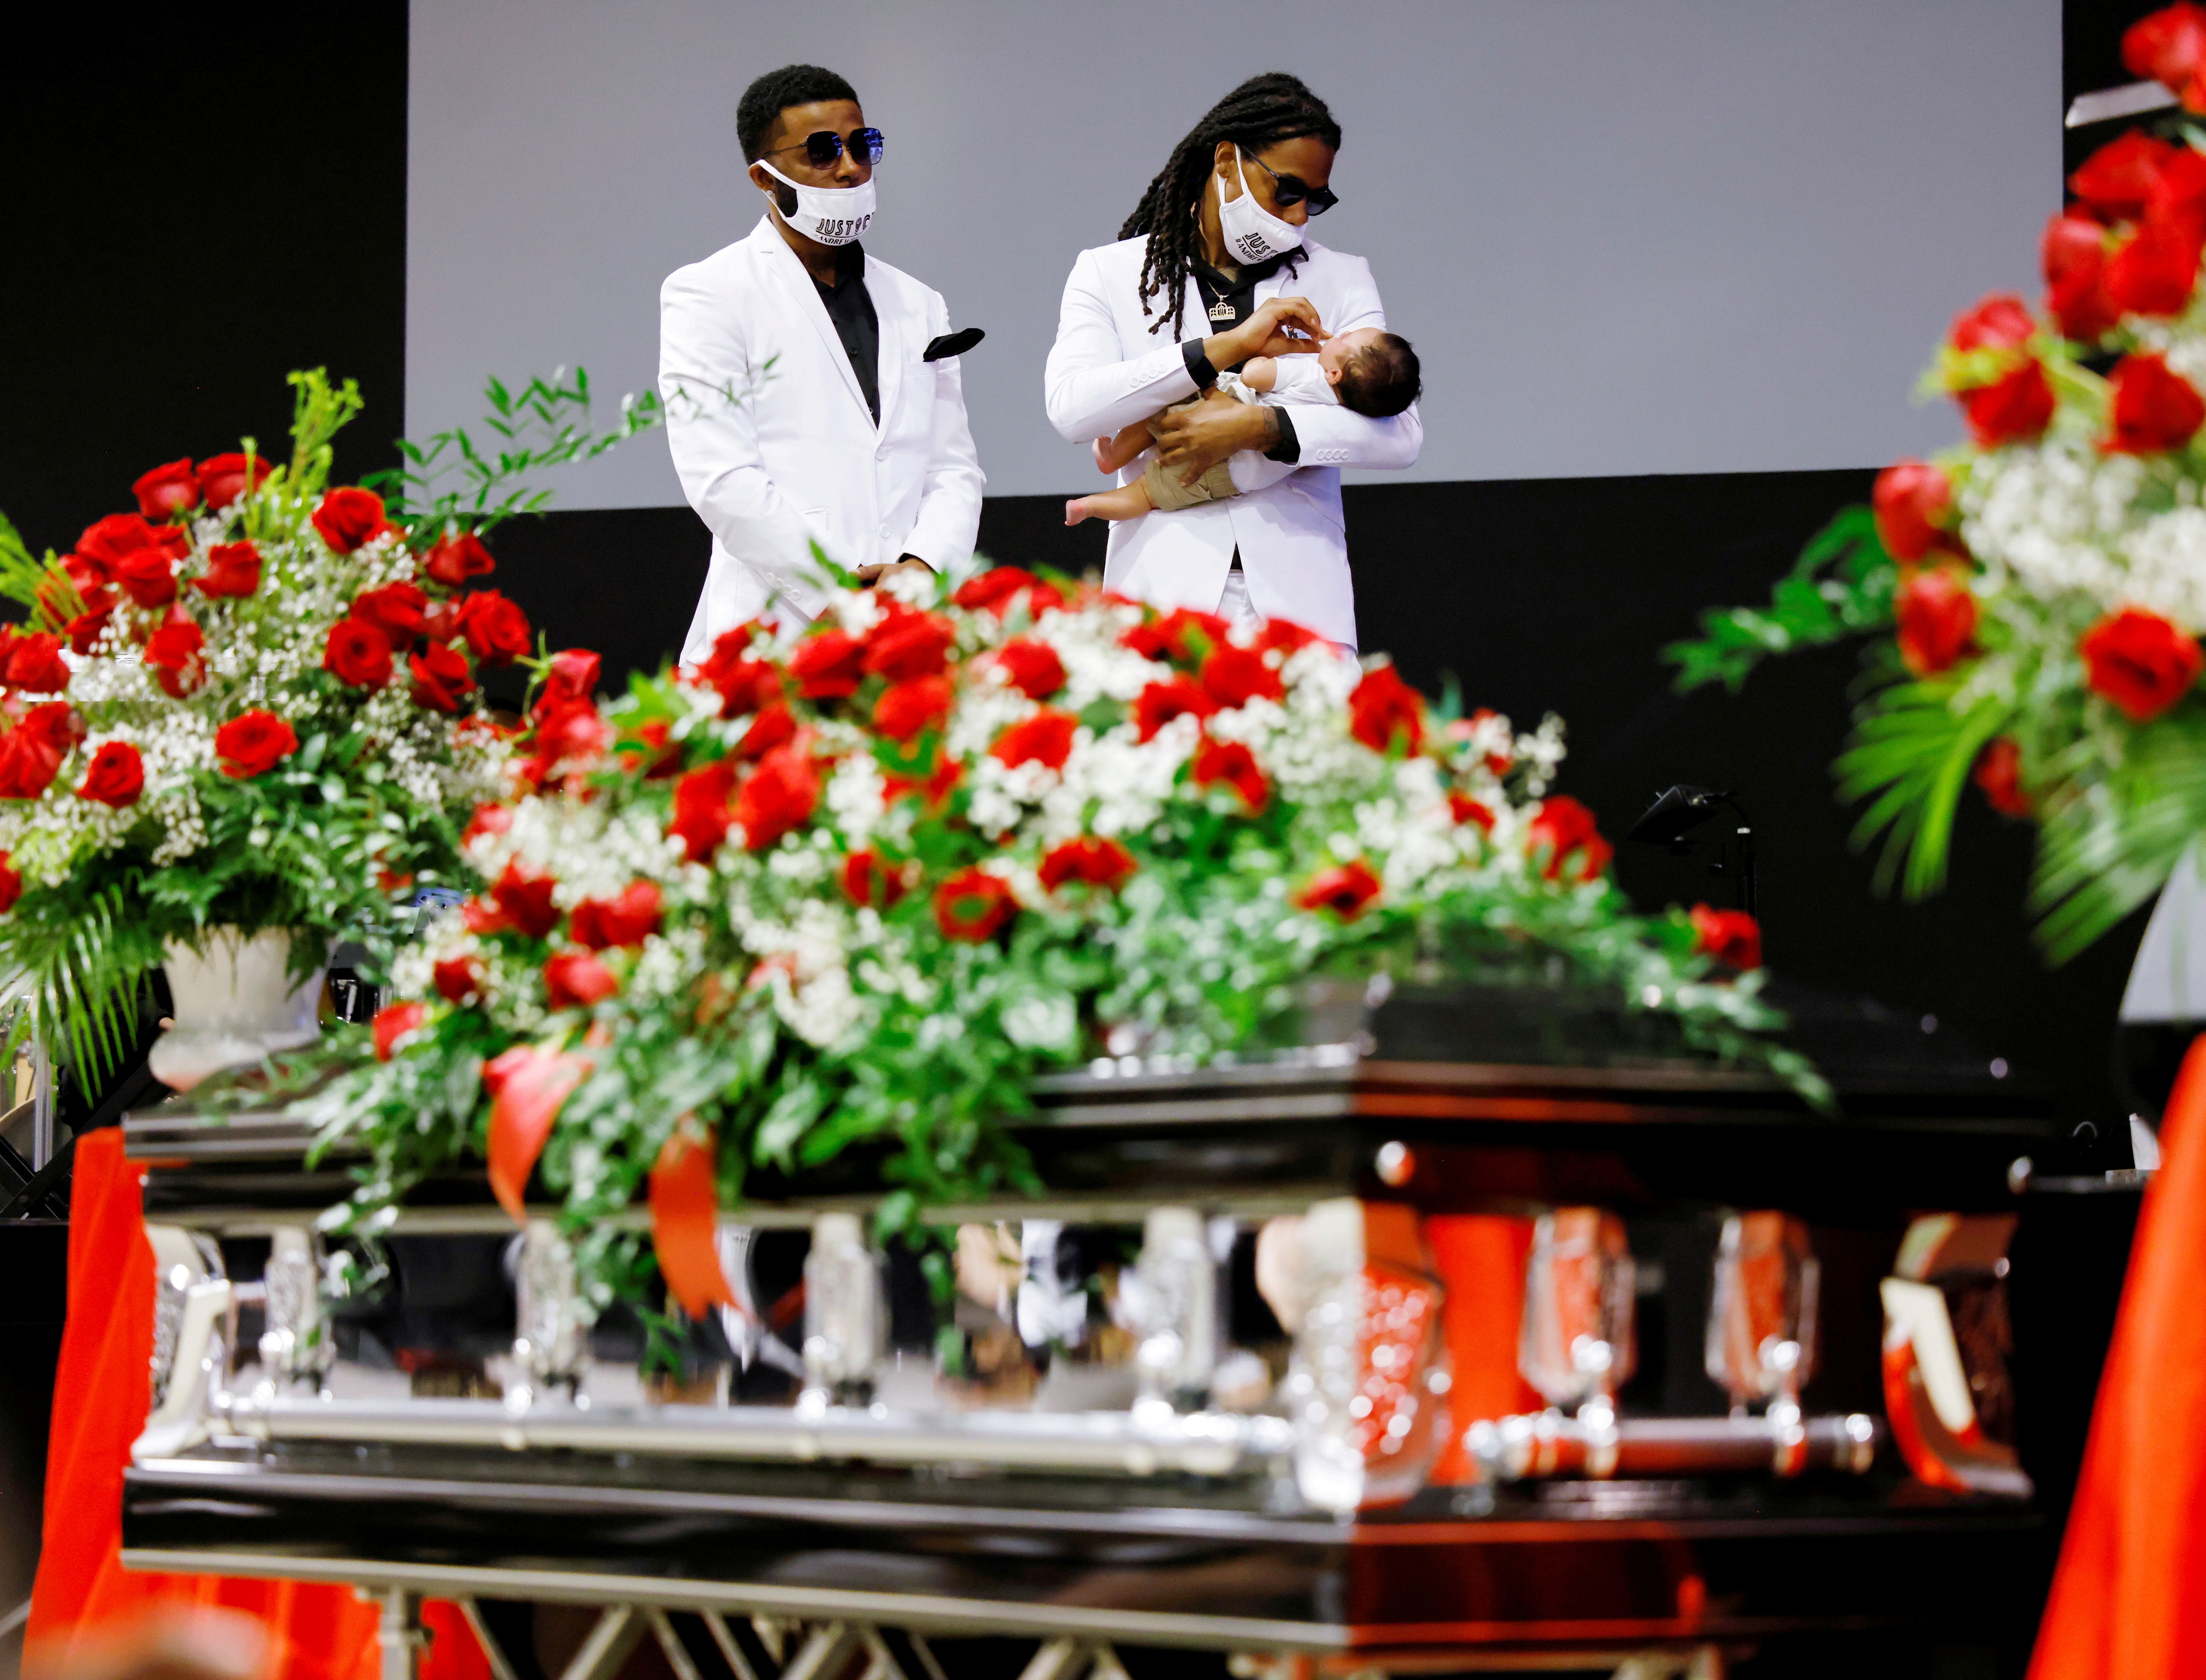 Khalil Ferebee tends to his baby son Karter while standing with his brother Jha'rod Ferebee on a stage behind the coffin of their father Andrew Brown Jr. at the funeral in Elizabeth City, North Carolina, U.S., May 3, 2021. REUTERS/Jonathan Drake     TPX IMAGES OF THE DAY/File Photo